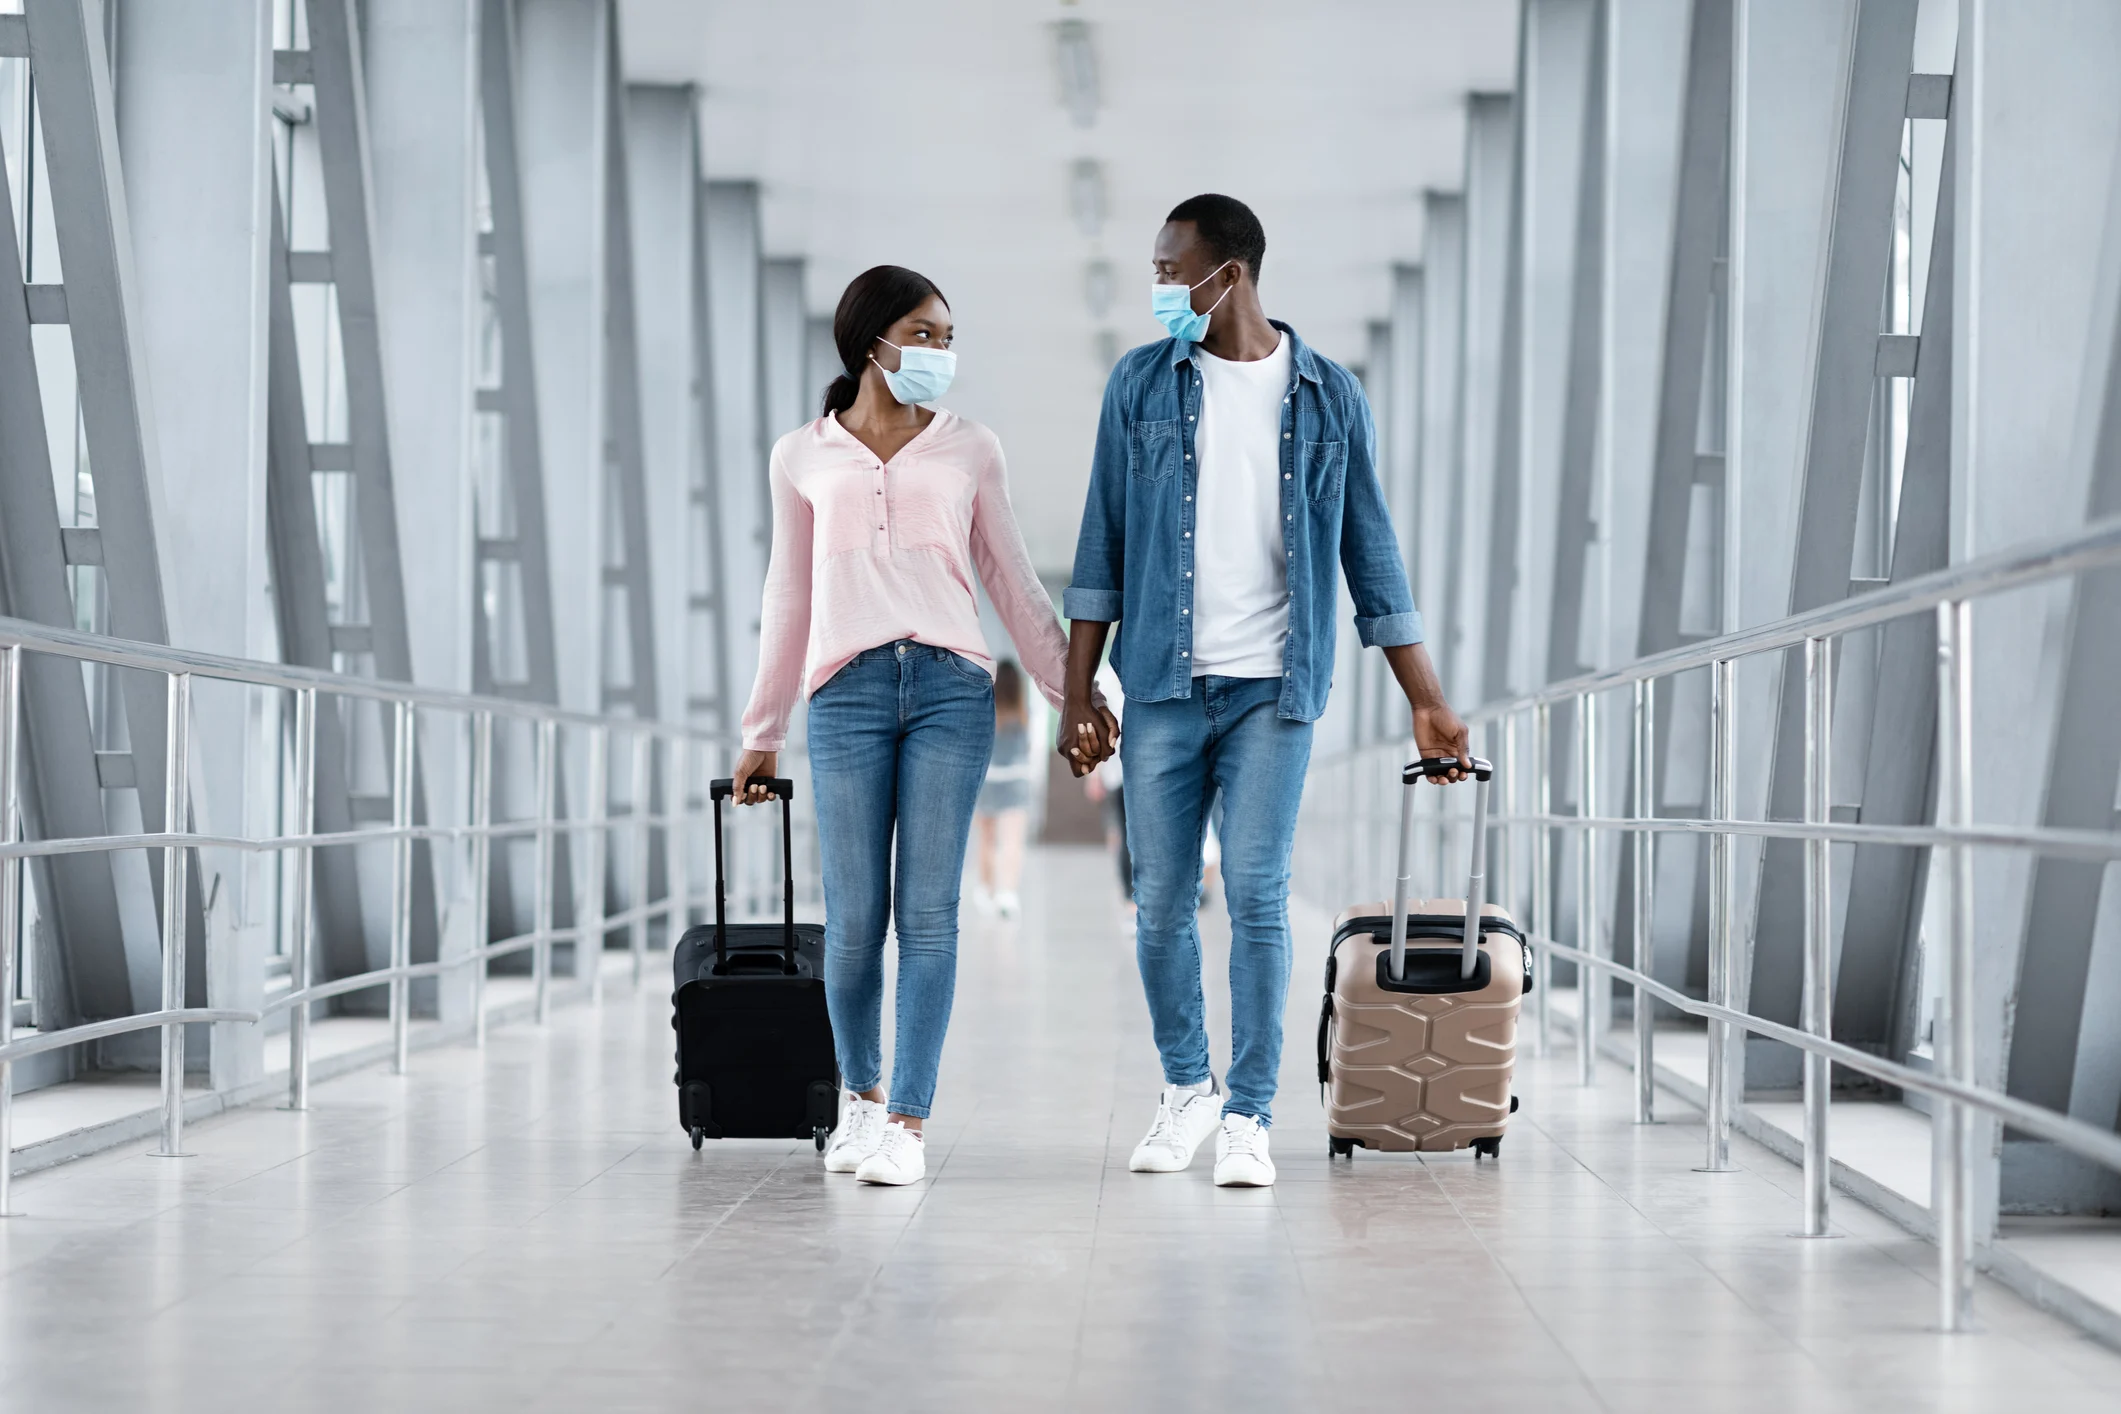 Couple holding hands, wearing masks, in airport